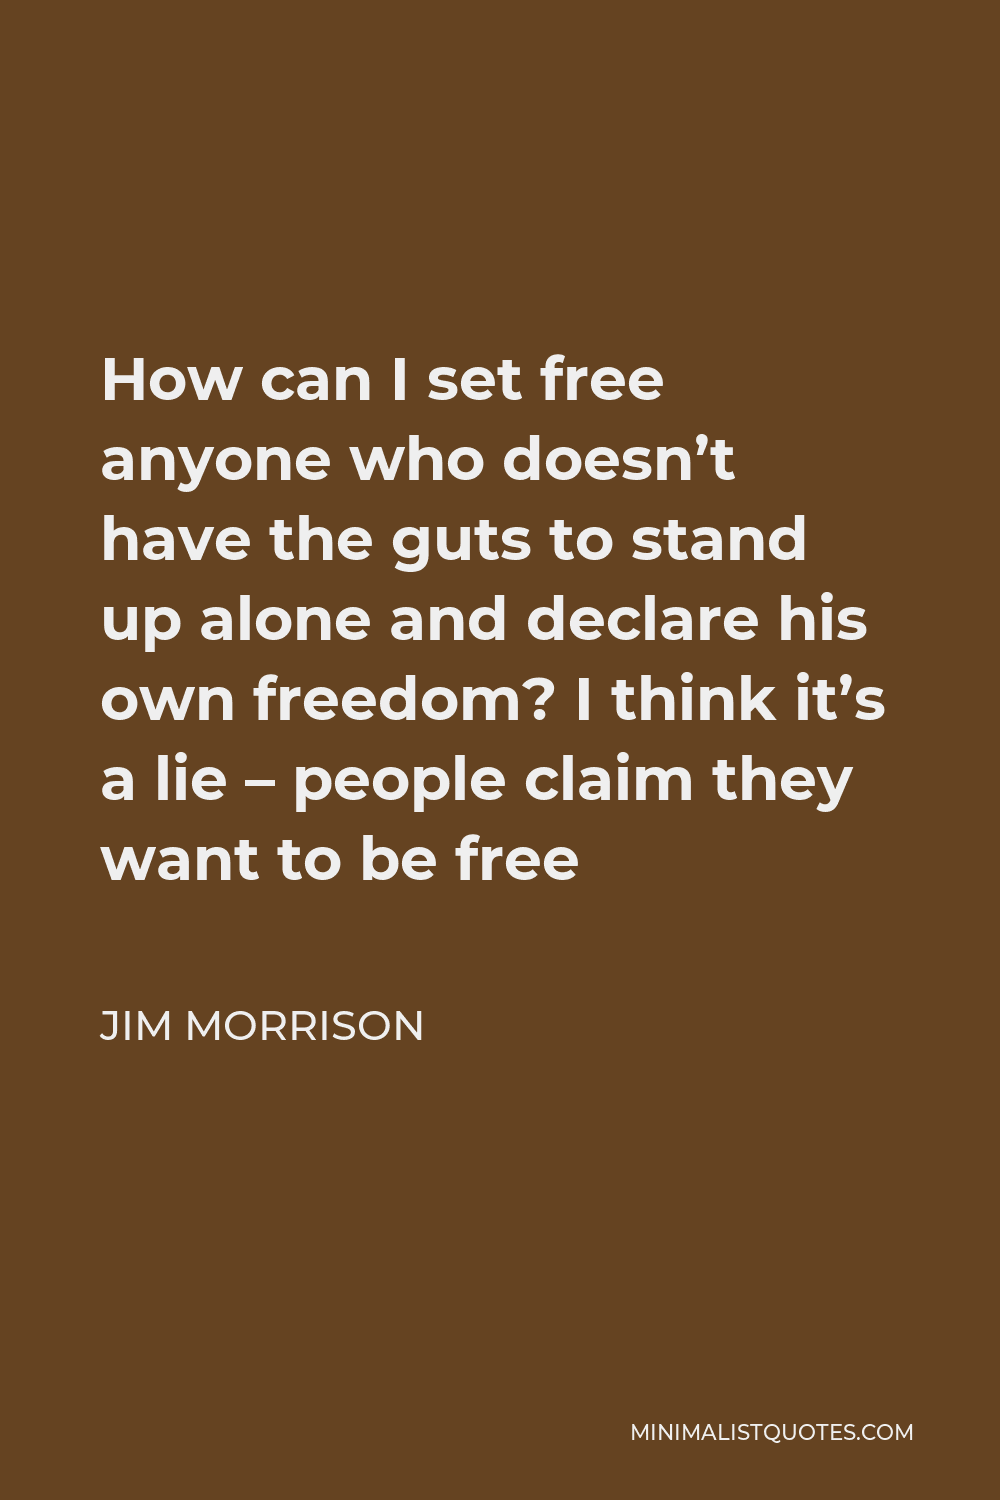 Jim Morrison Quote - How can I set free anyone who doesn’t have the guts to stand up alone and declare his own freedom? I think it’s a lie – people claim they want to be free